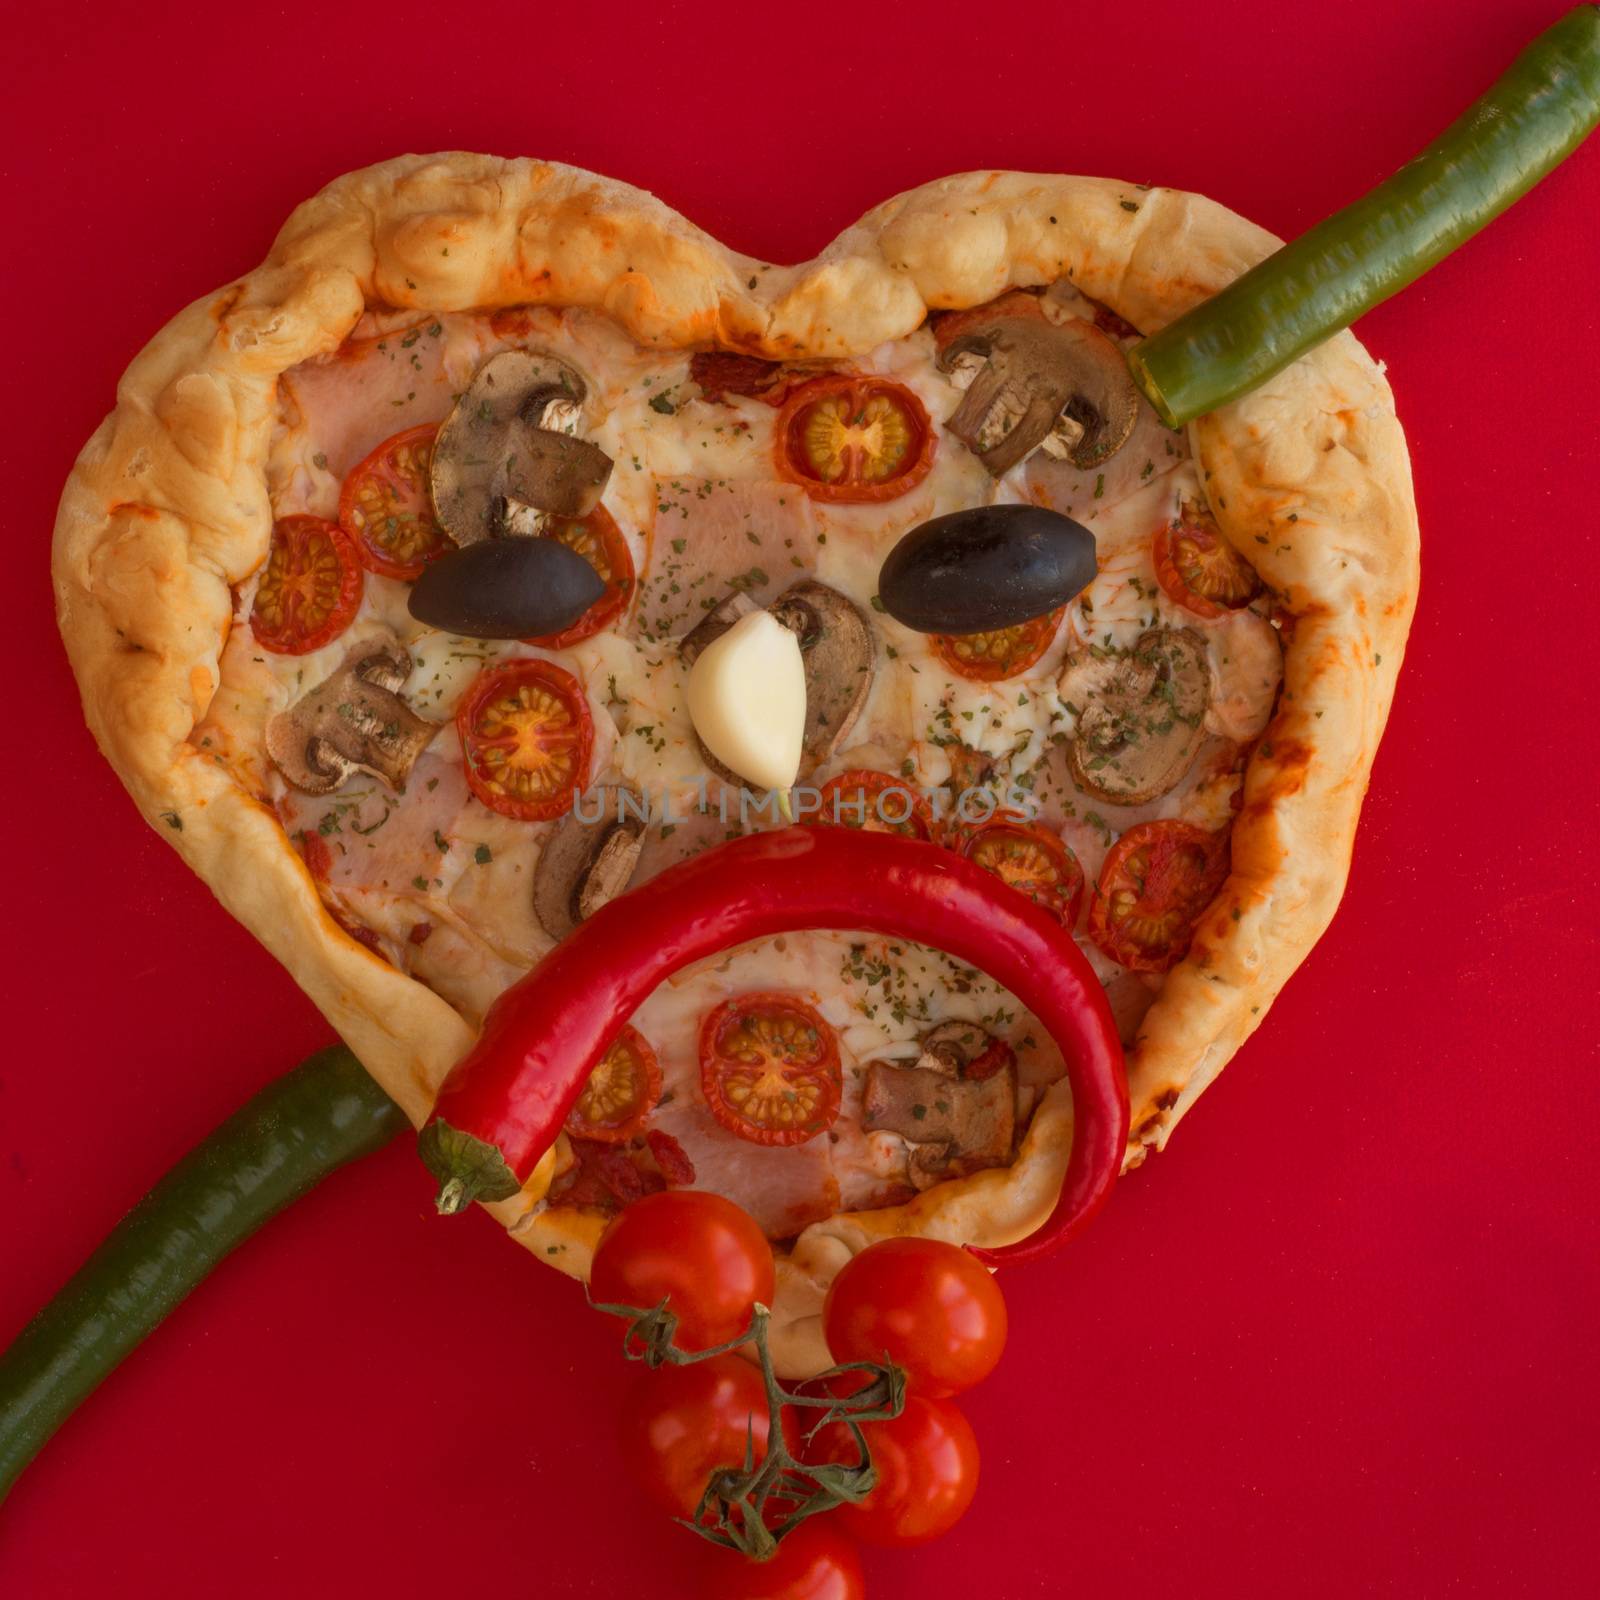 Pizza heart shaped on red by destillat